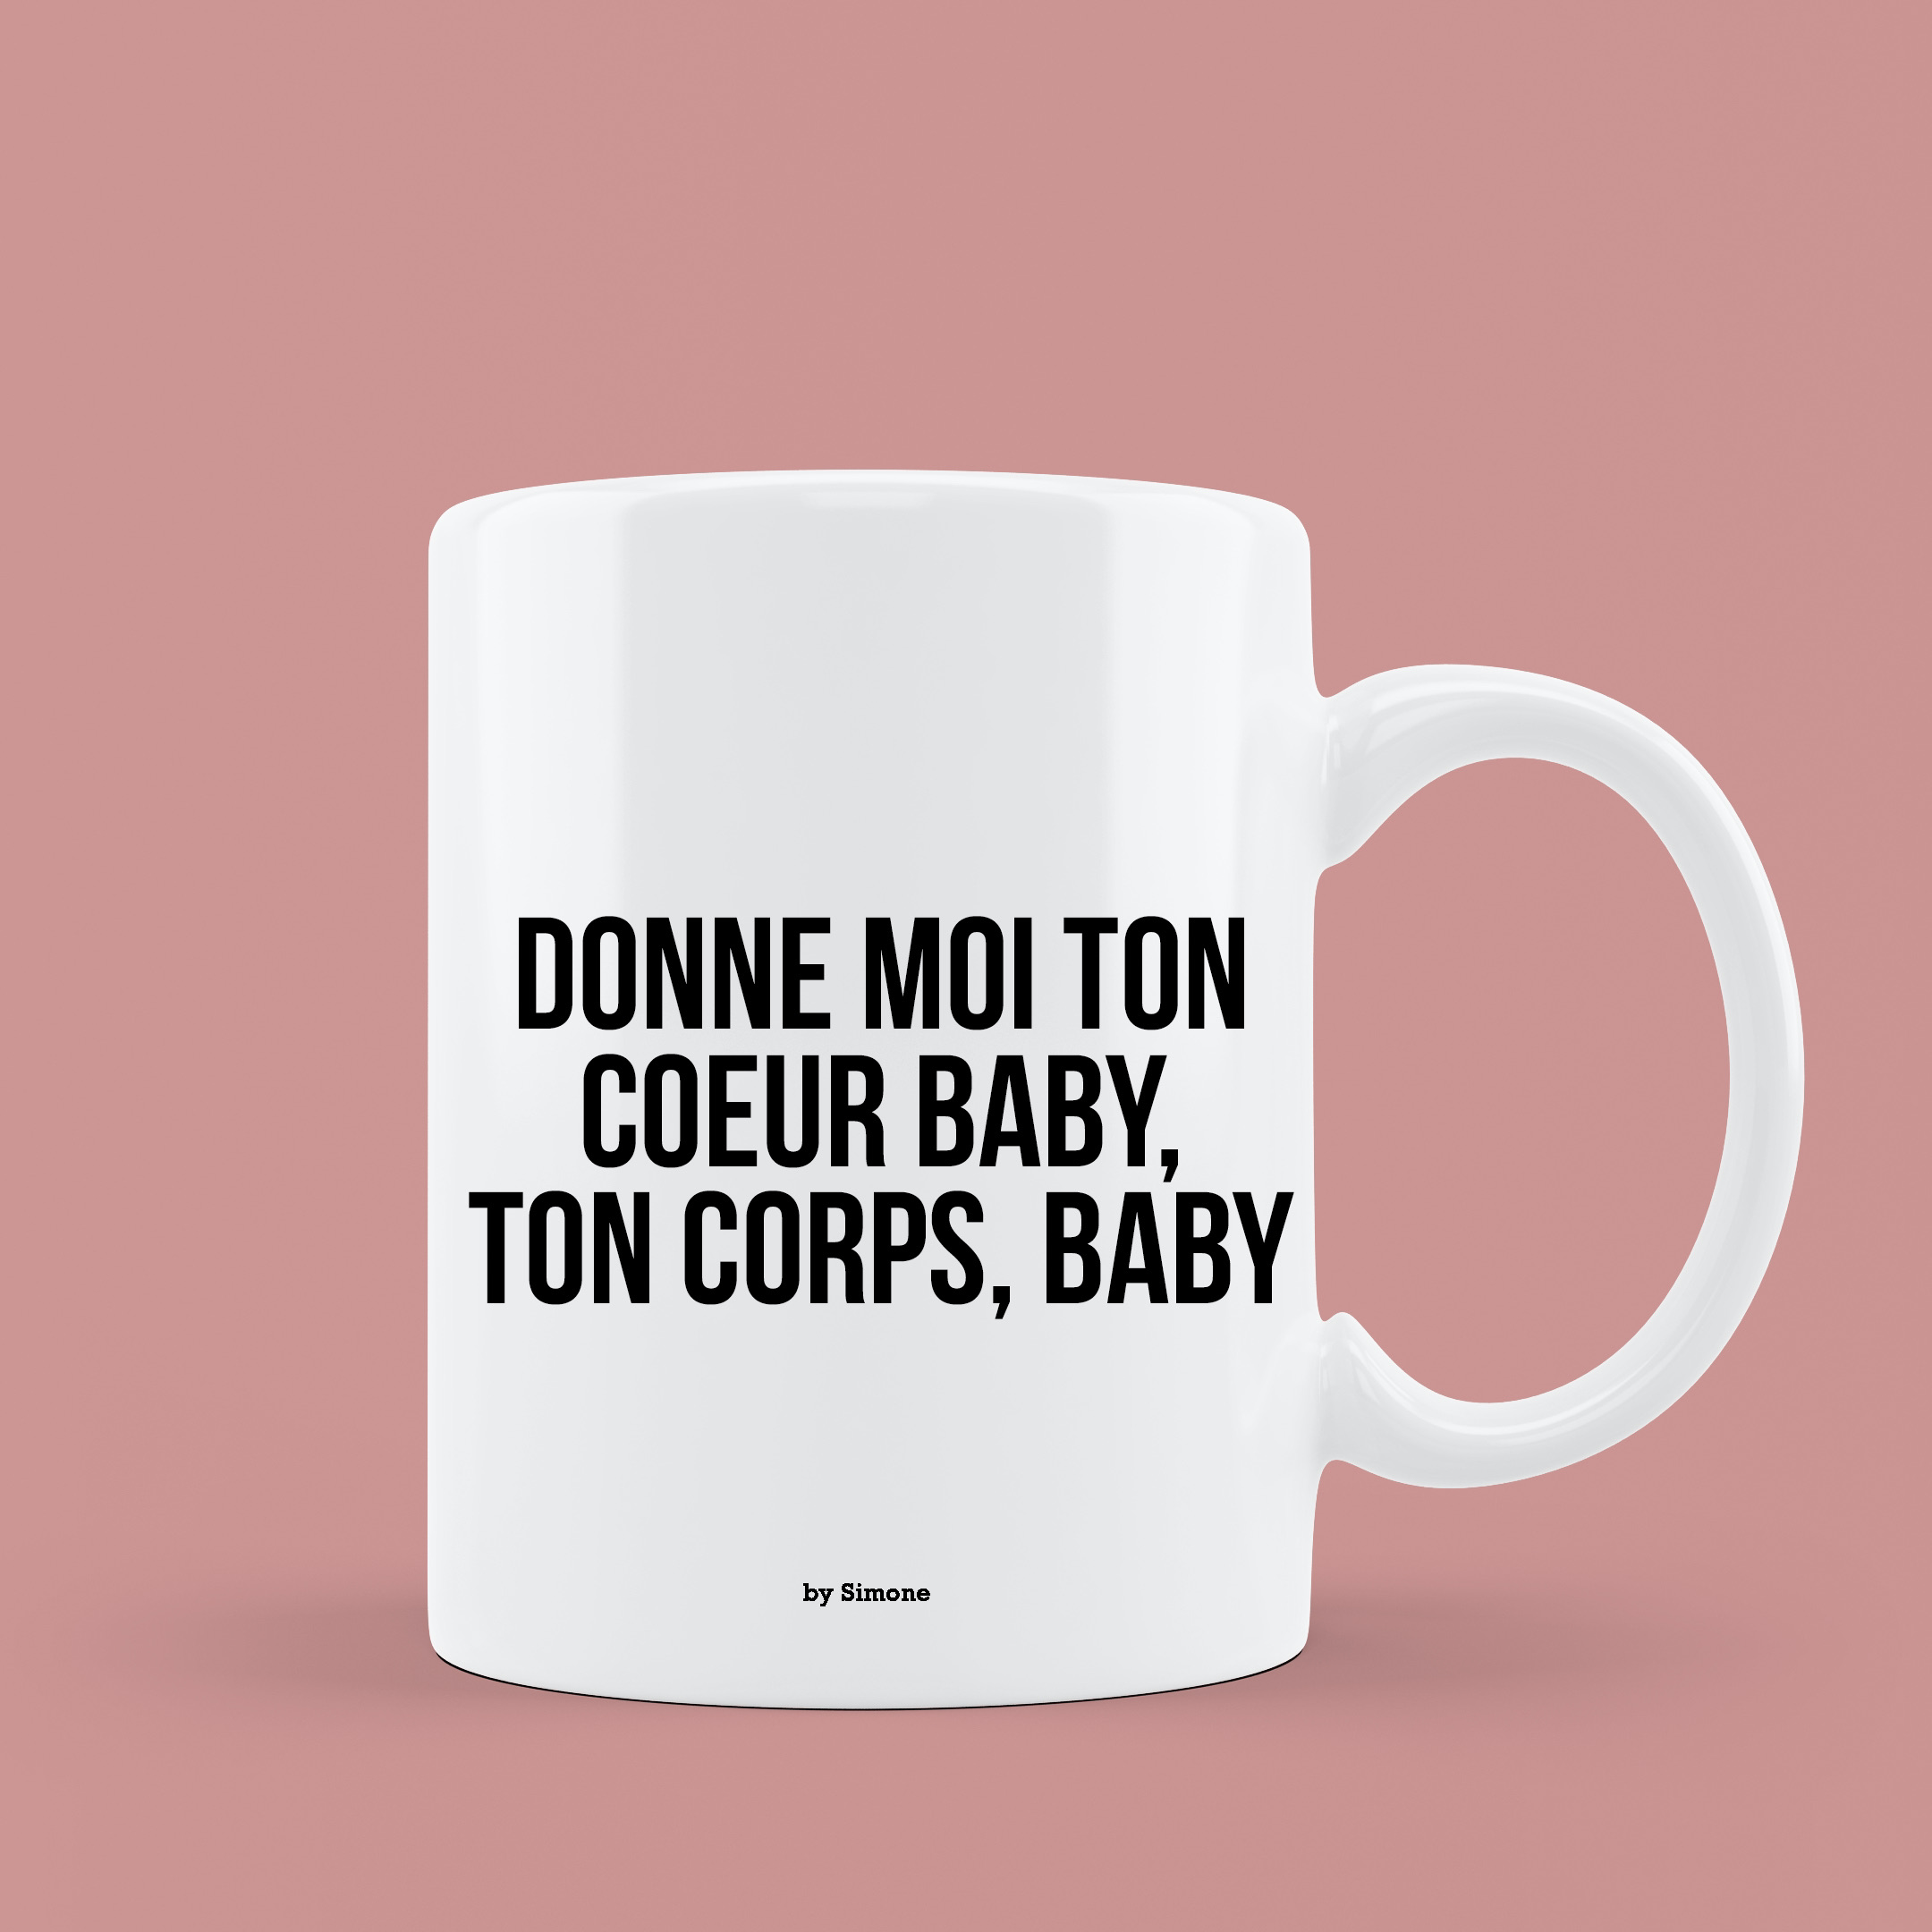 DONNE MOI TON COEUR BABY, TON CORPS, BABY